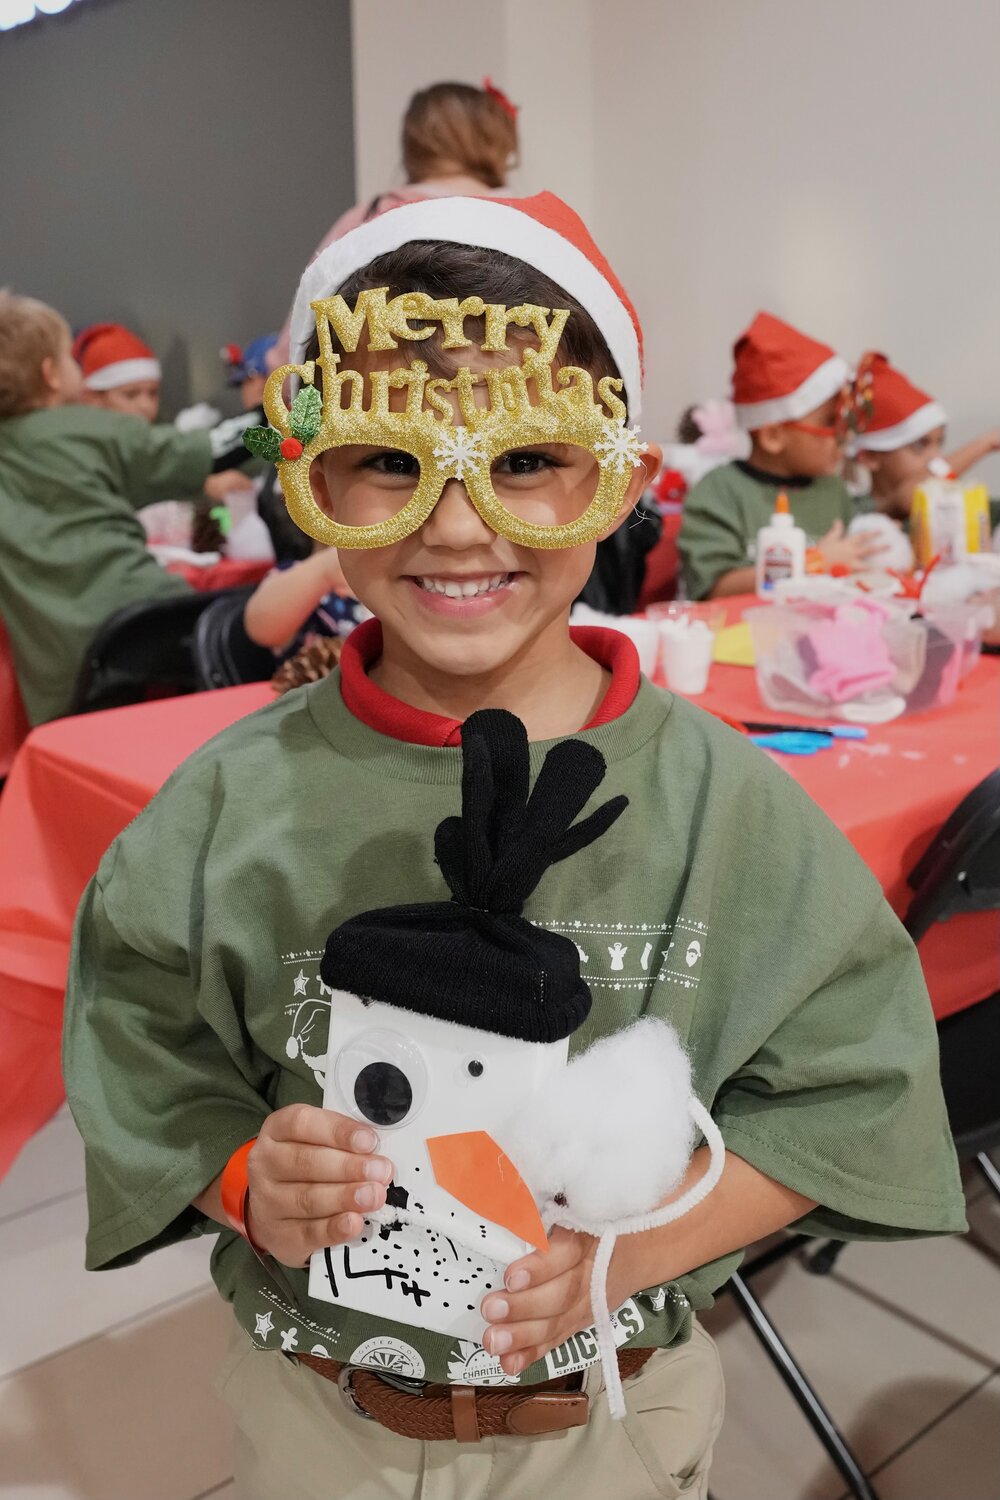 The son of an active, deployed parent from Luke Air Force Base enjoys the Operation Santa event  and shopping spree Dec. 7 at Dick's Sporting Goods at Arrowhead Towne Center in Glendale.